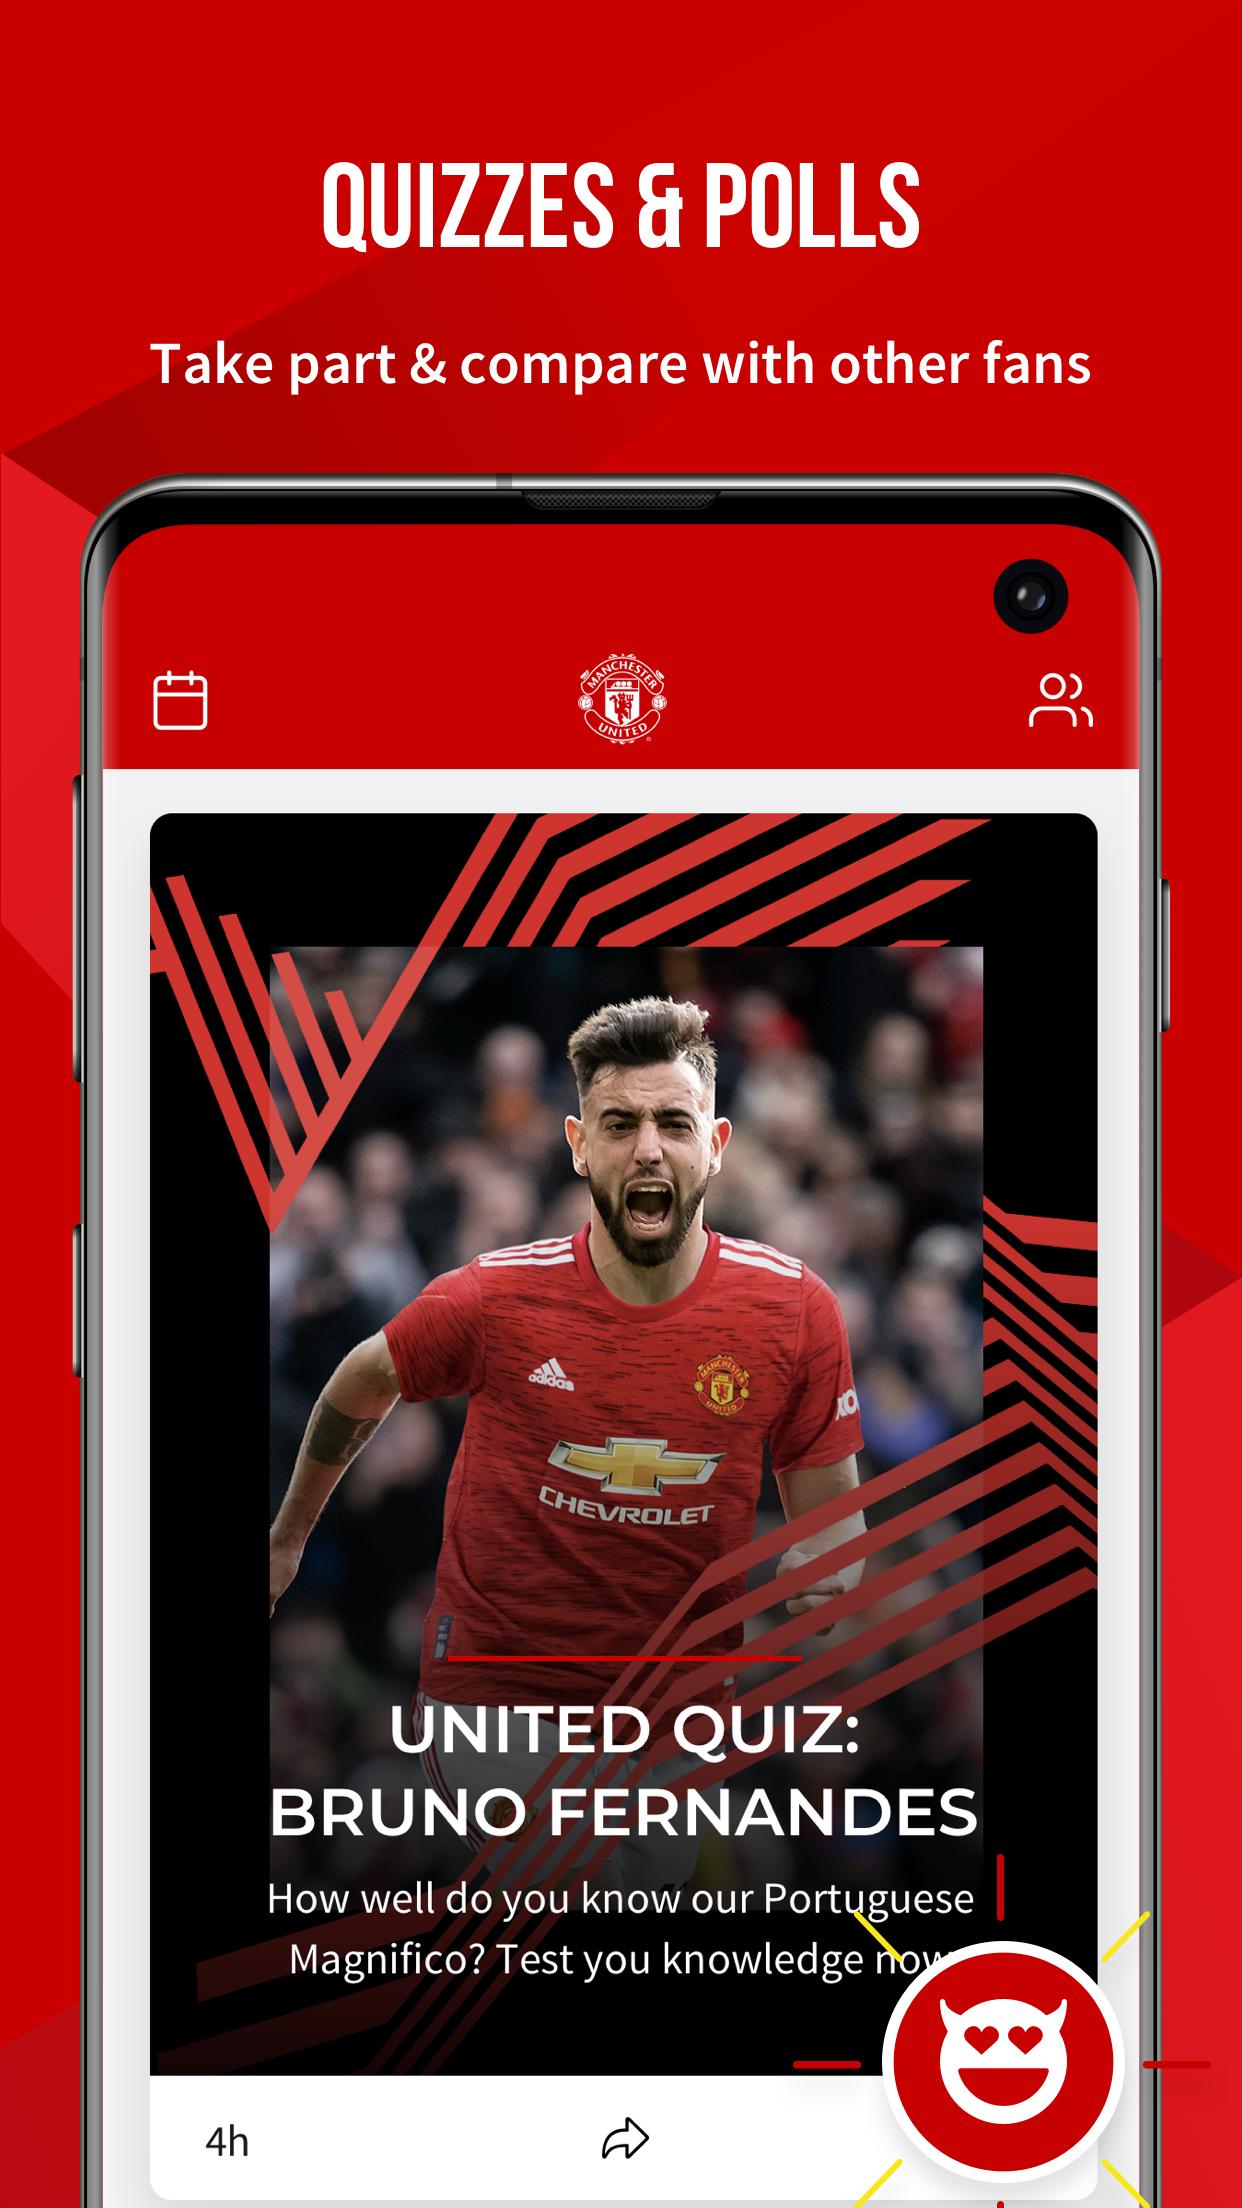 Manchester United Official App for Android - APK Download